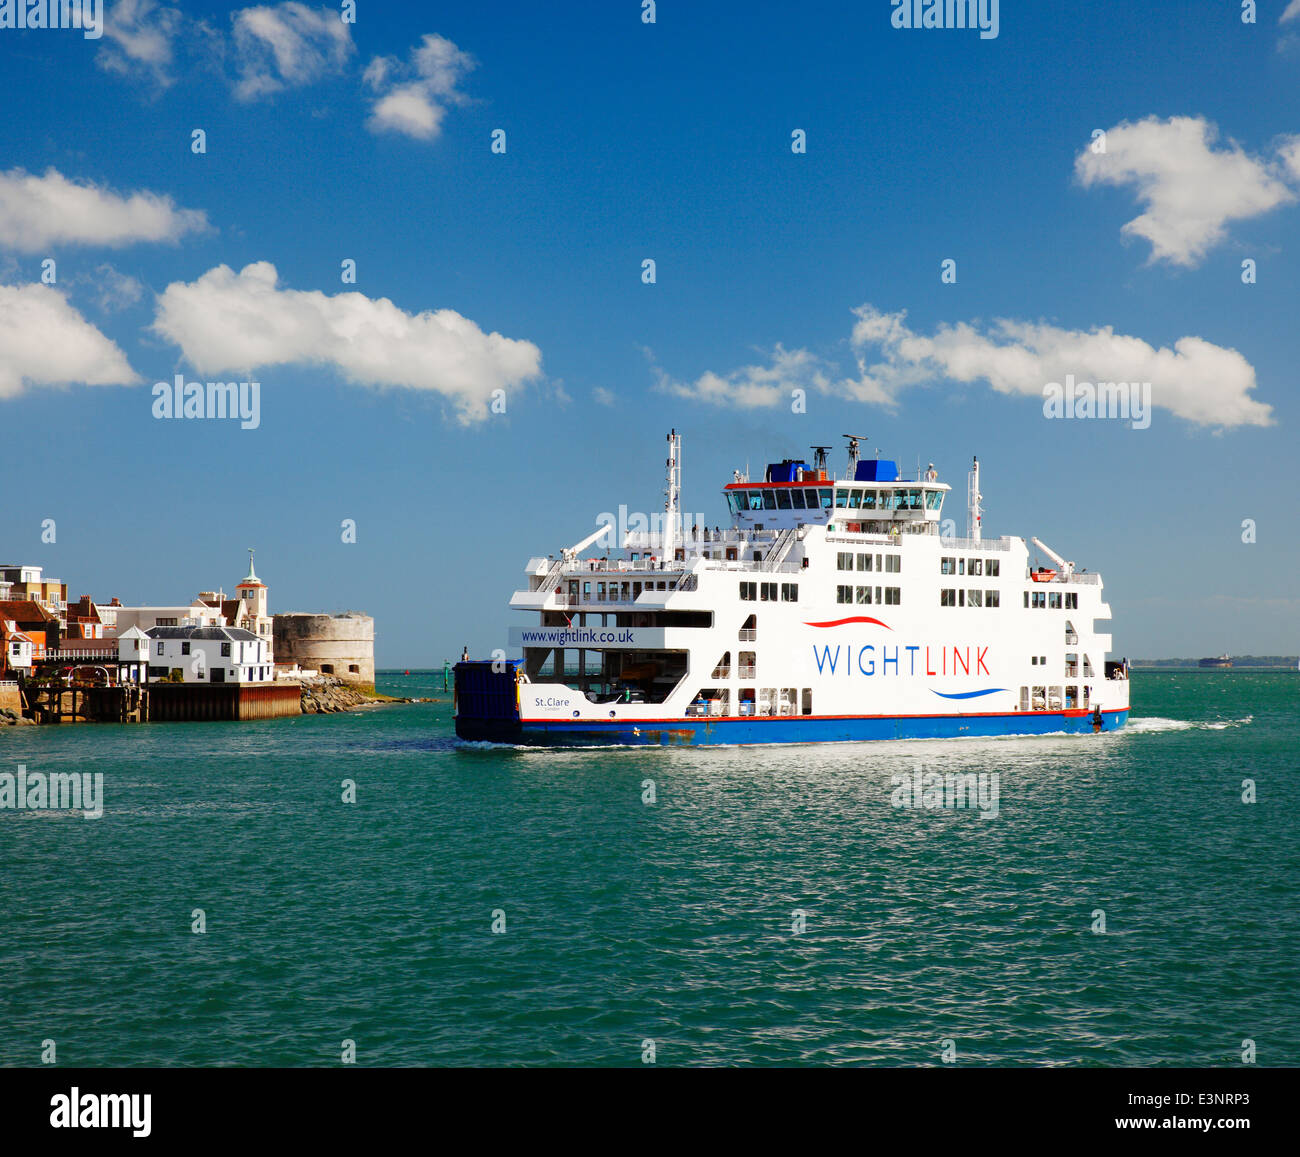 Wightlink Isle Of Wight Fähre St Clare in Portsmouth Harbour. Stockfoto